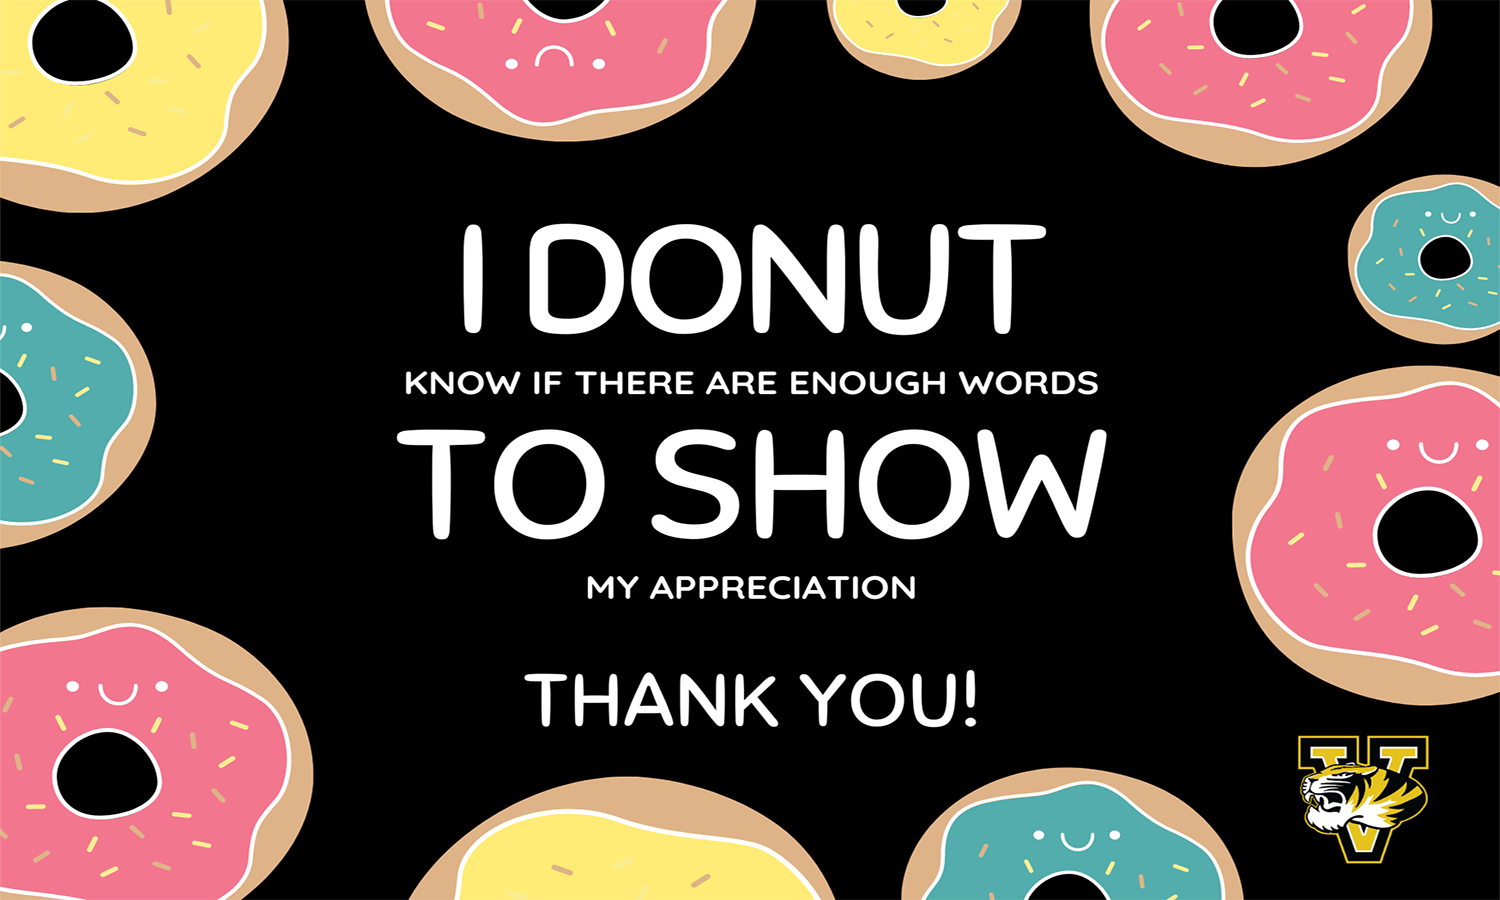 I Donut Know If There Are Enough Words to Show My Appreciation